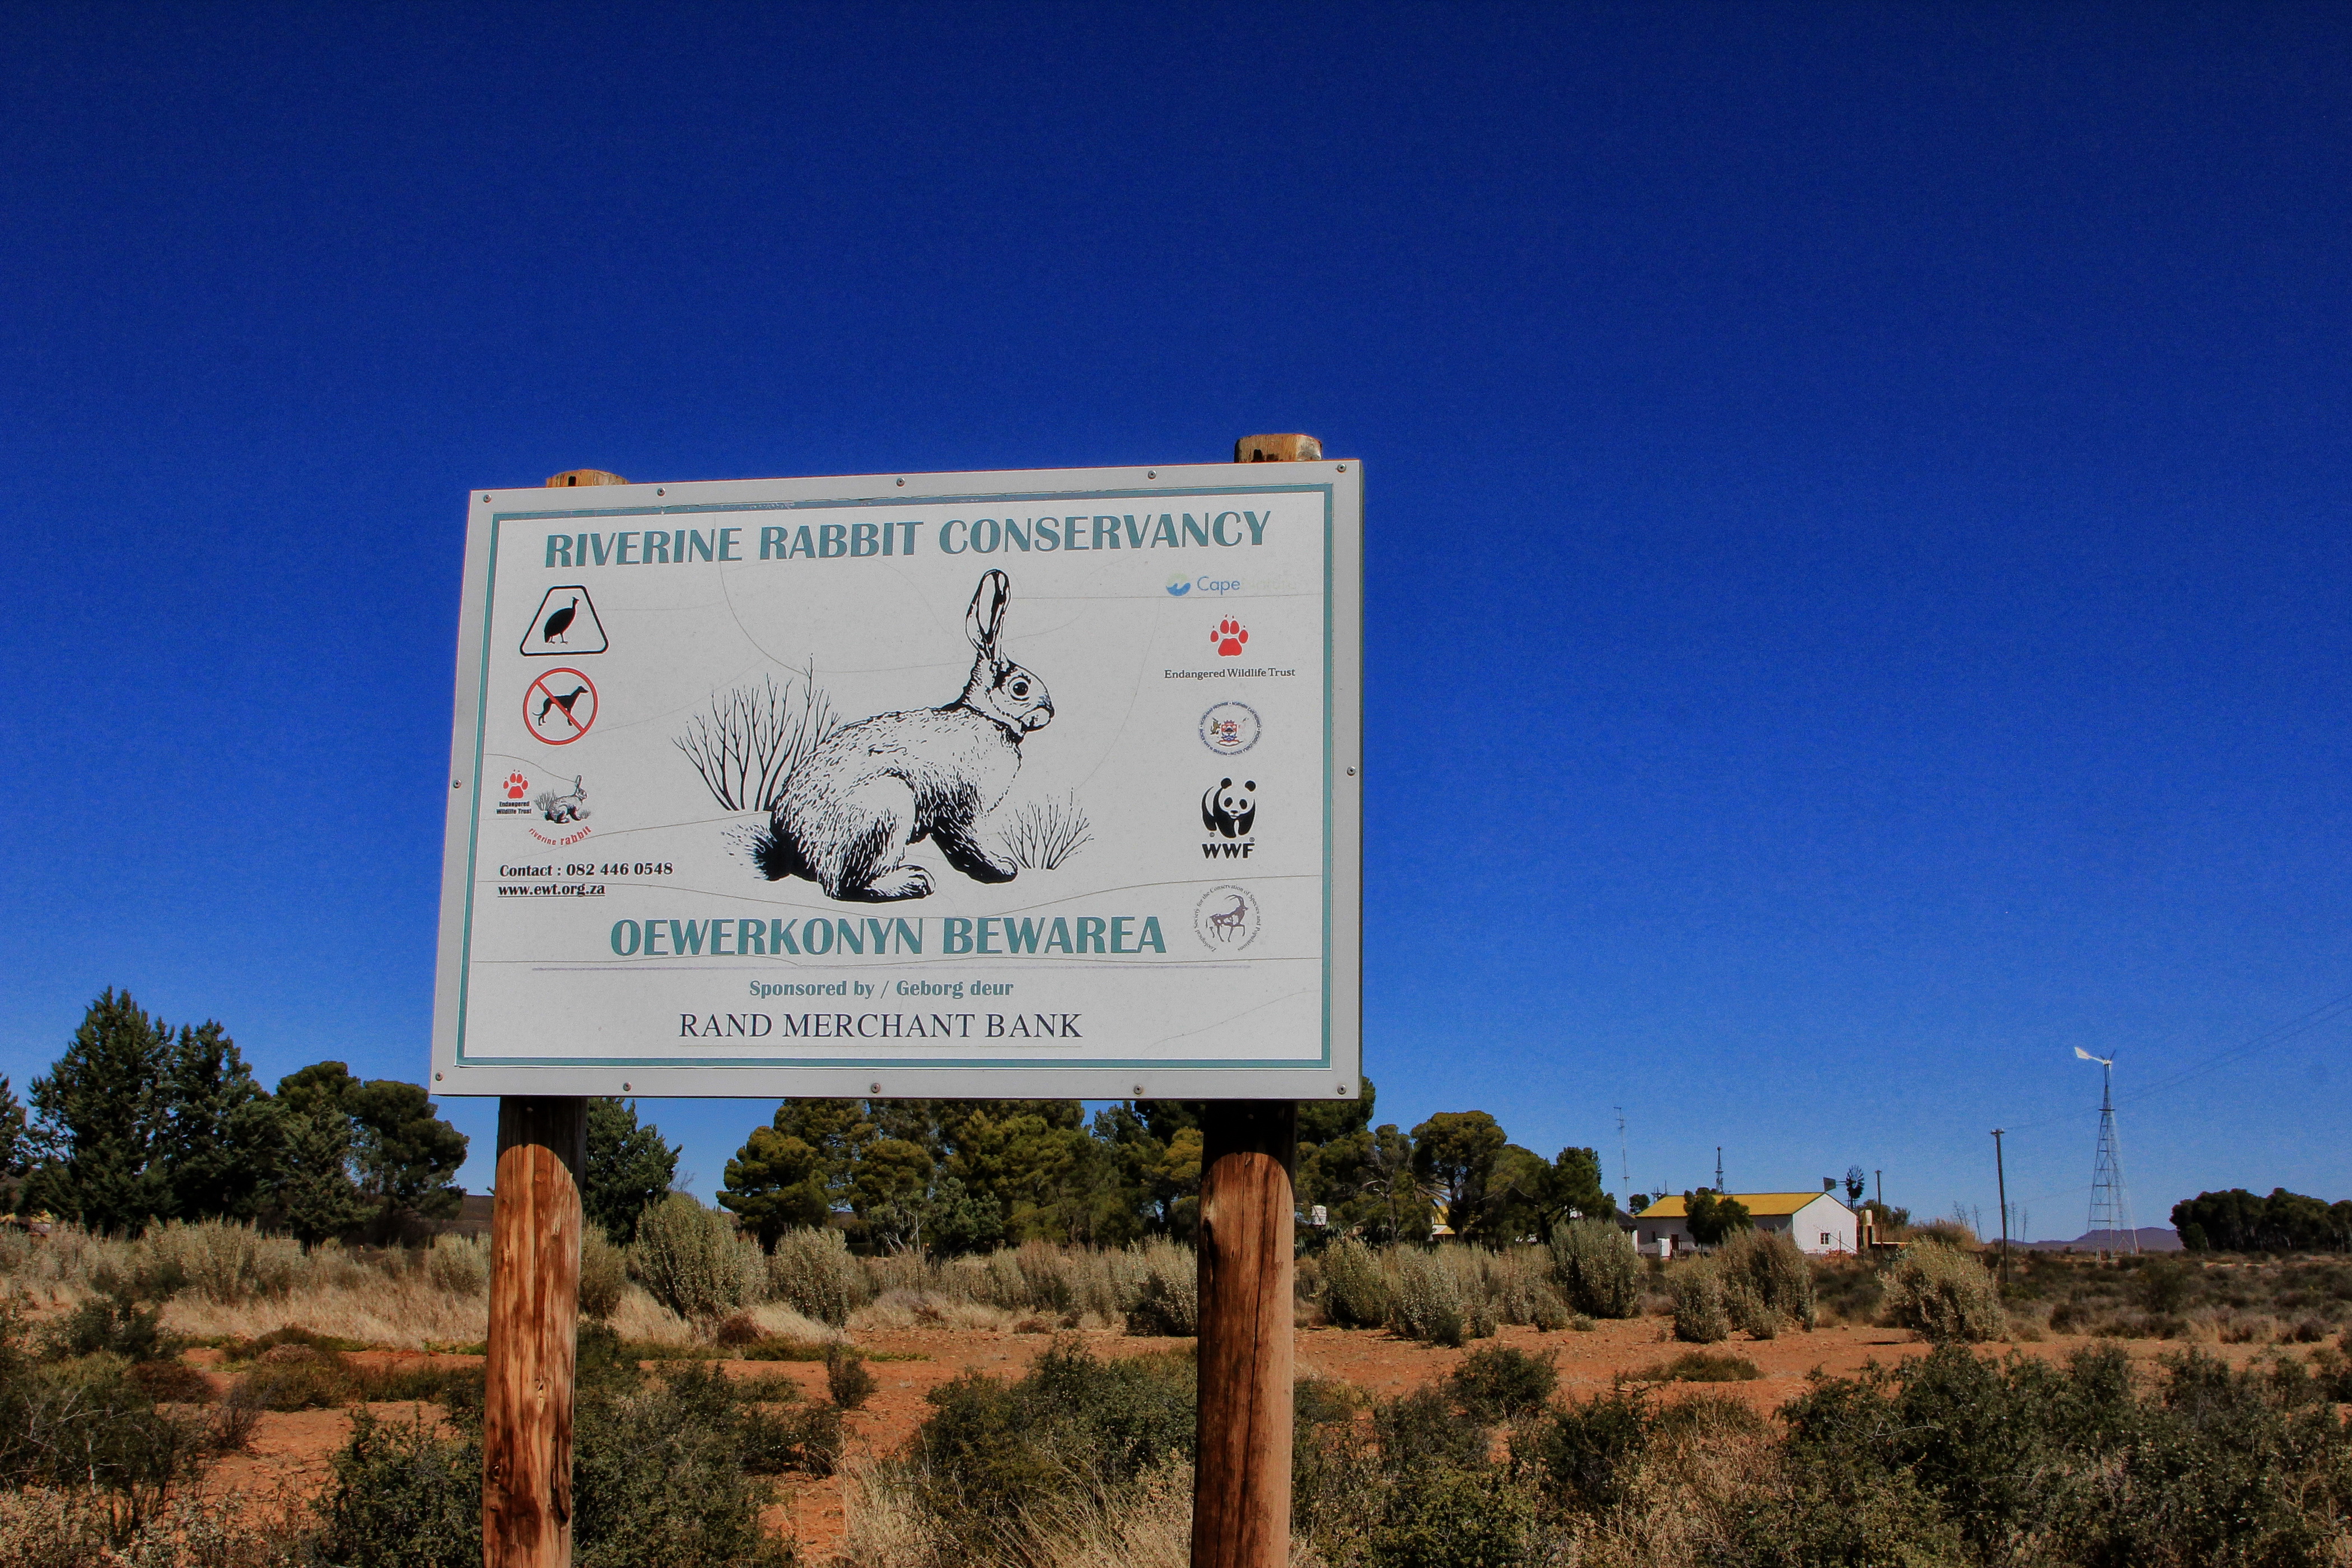 The Upper Karoo – home of the critically endangered riverine rabbit.